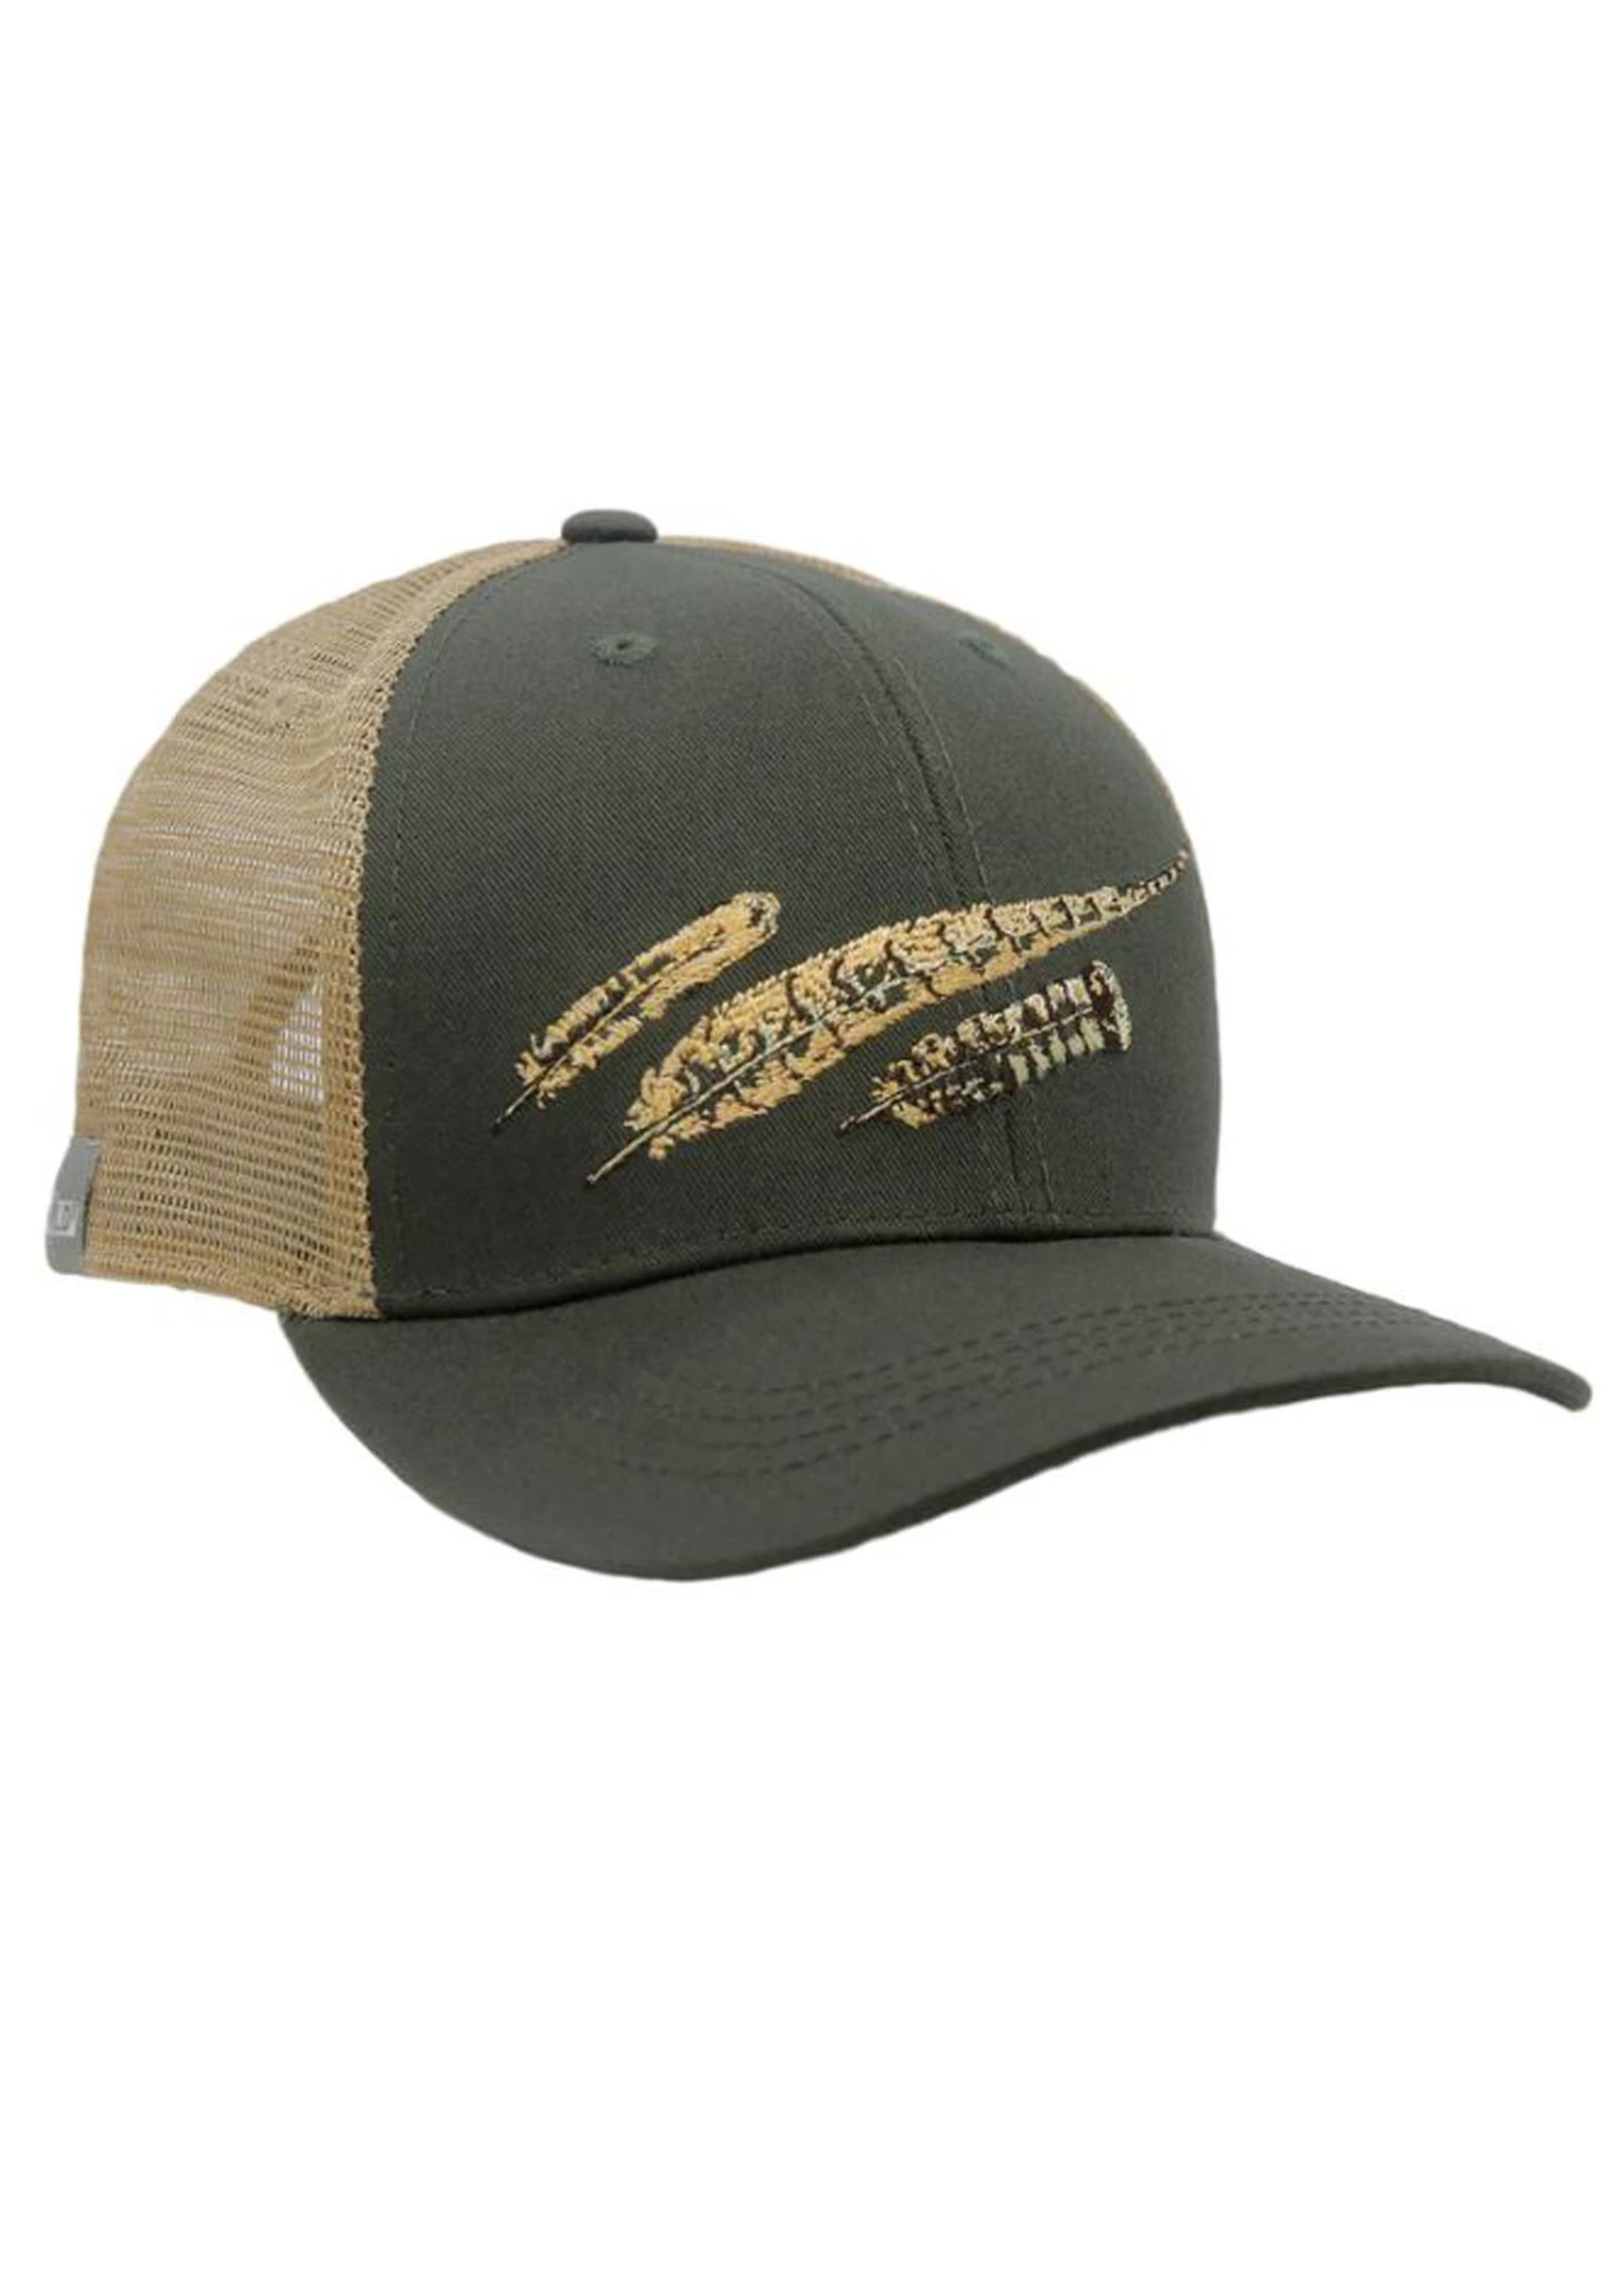 Rep Your Water RepYourWild Upland Feather Trio Standard Fit Hat